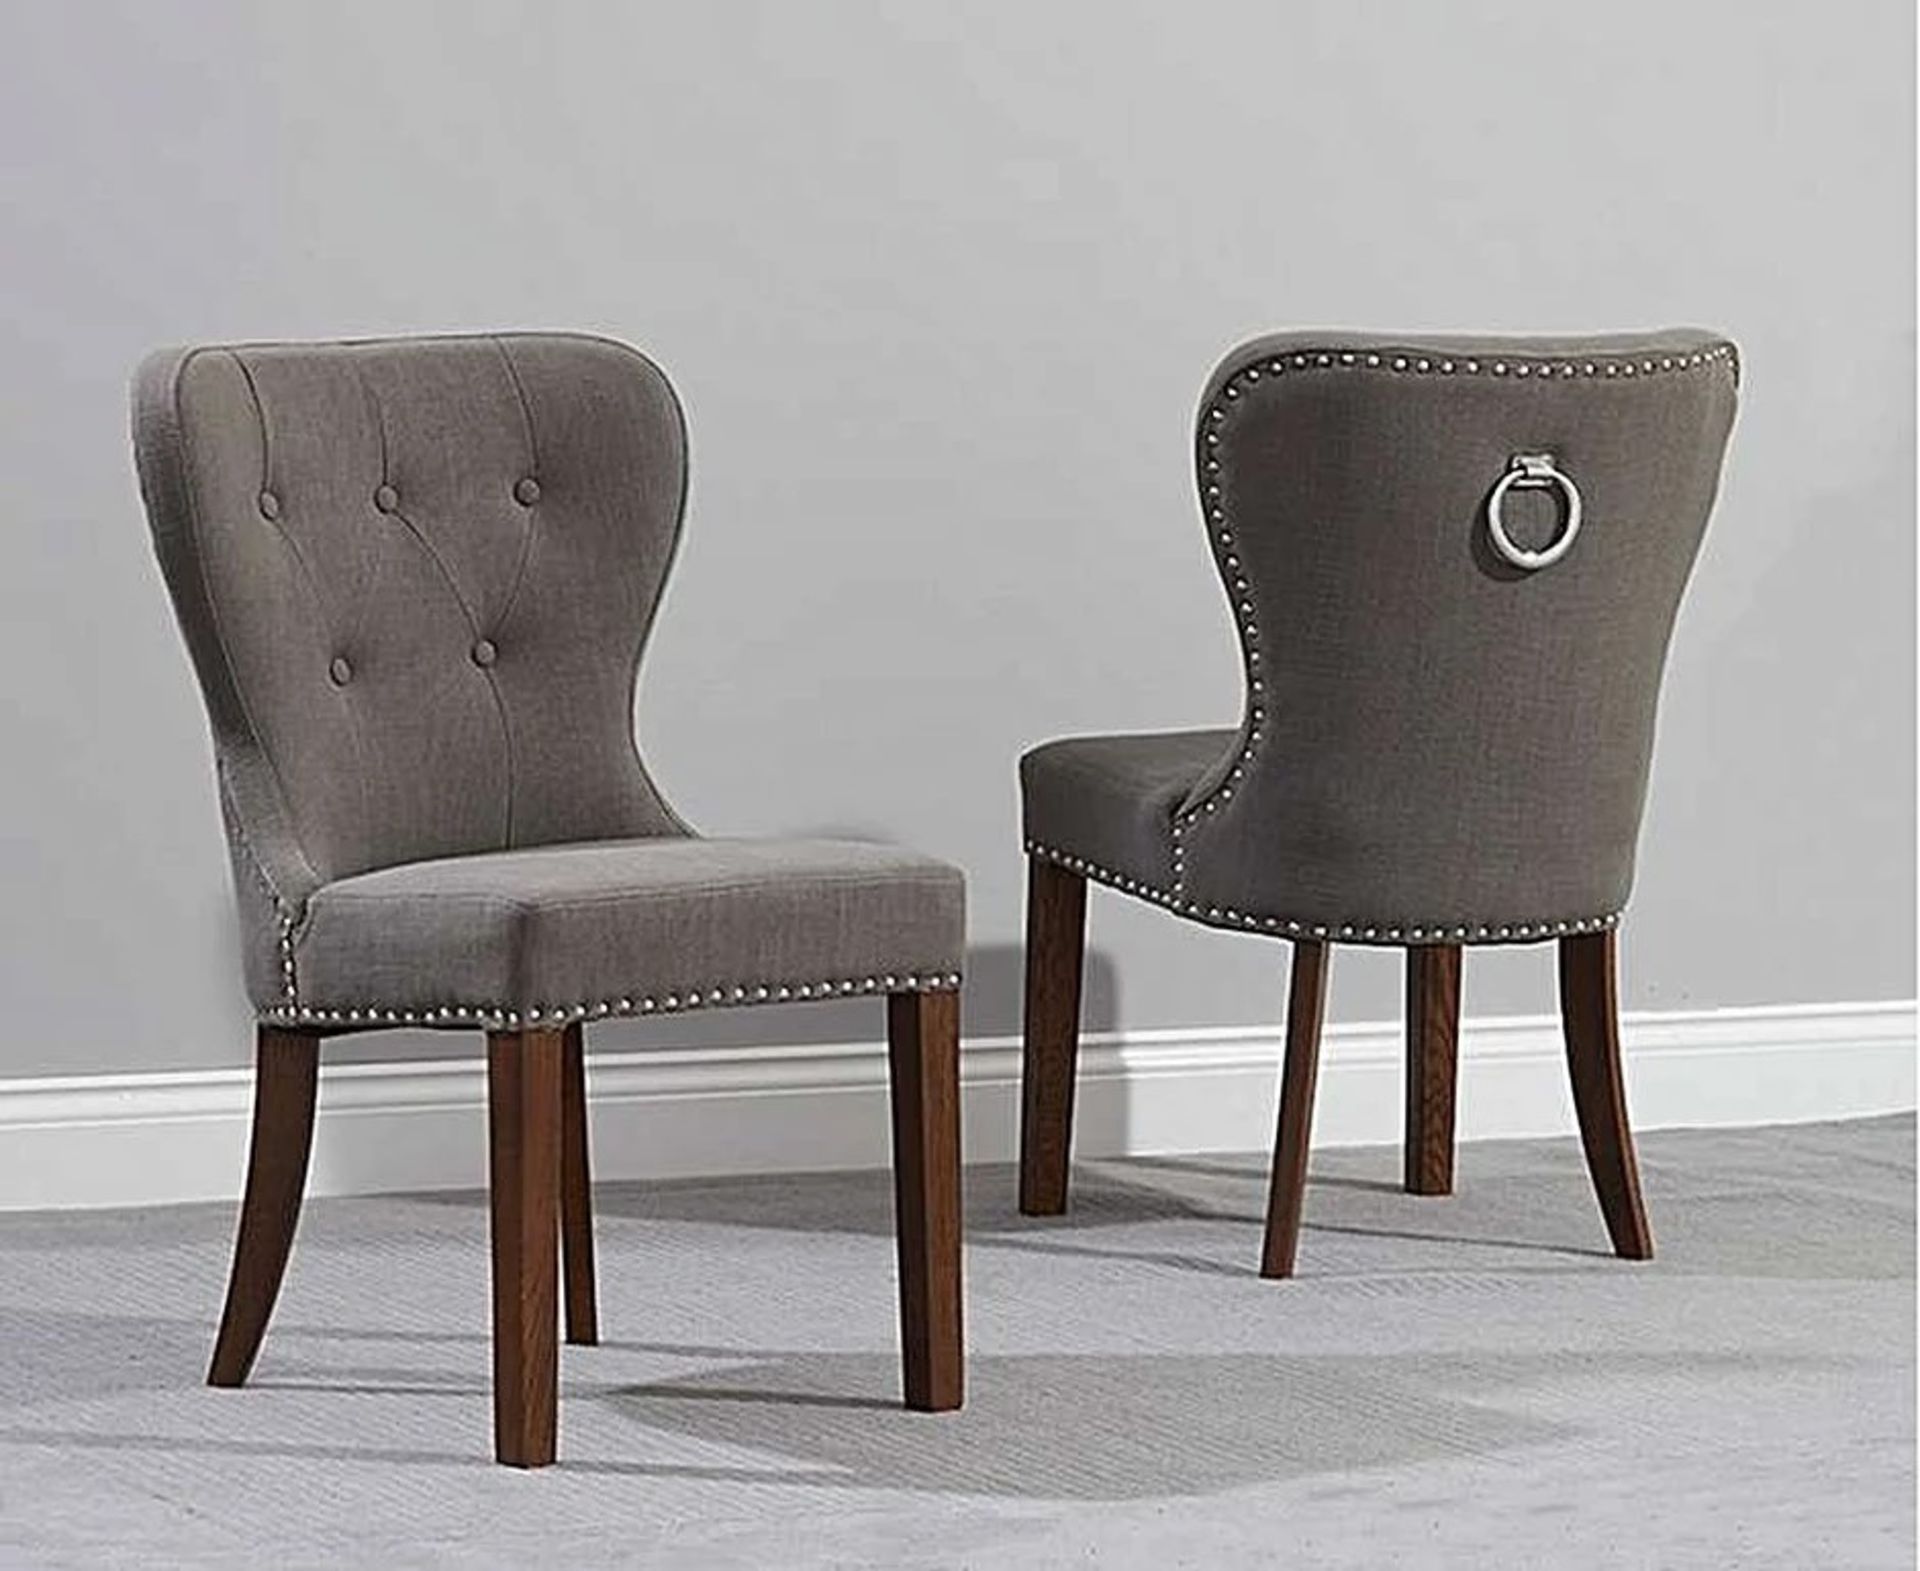 Knightsbridge Studded Grey Linen Dining Chair stunning Knightsbridge collection is an updated